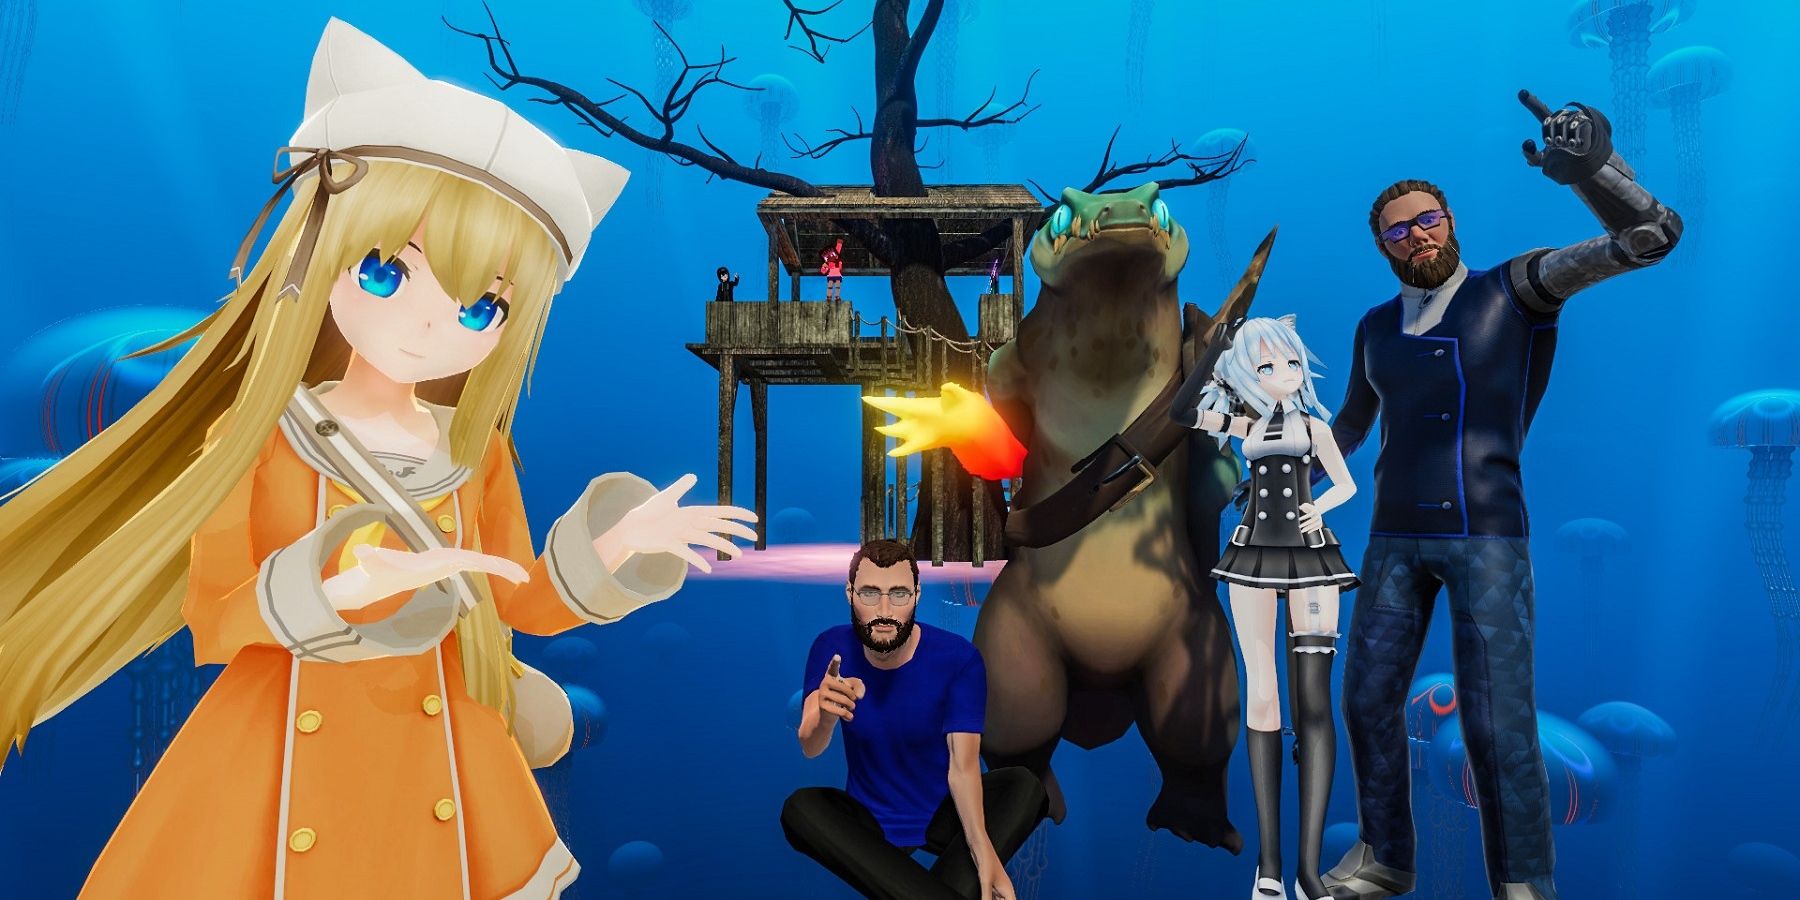 vrchat review bombed